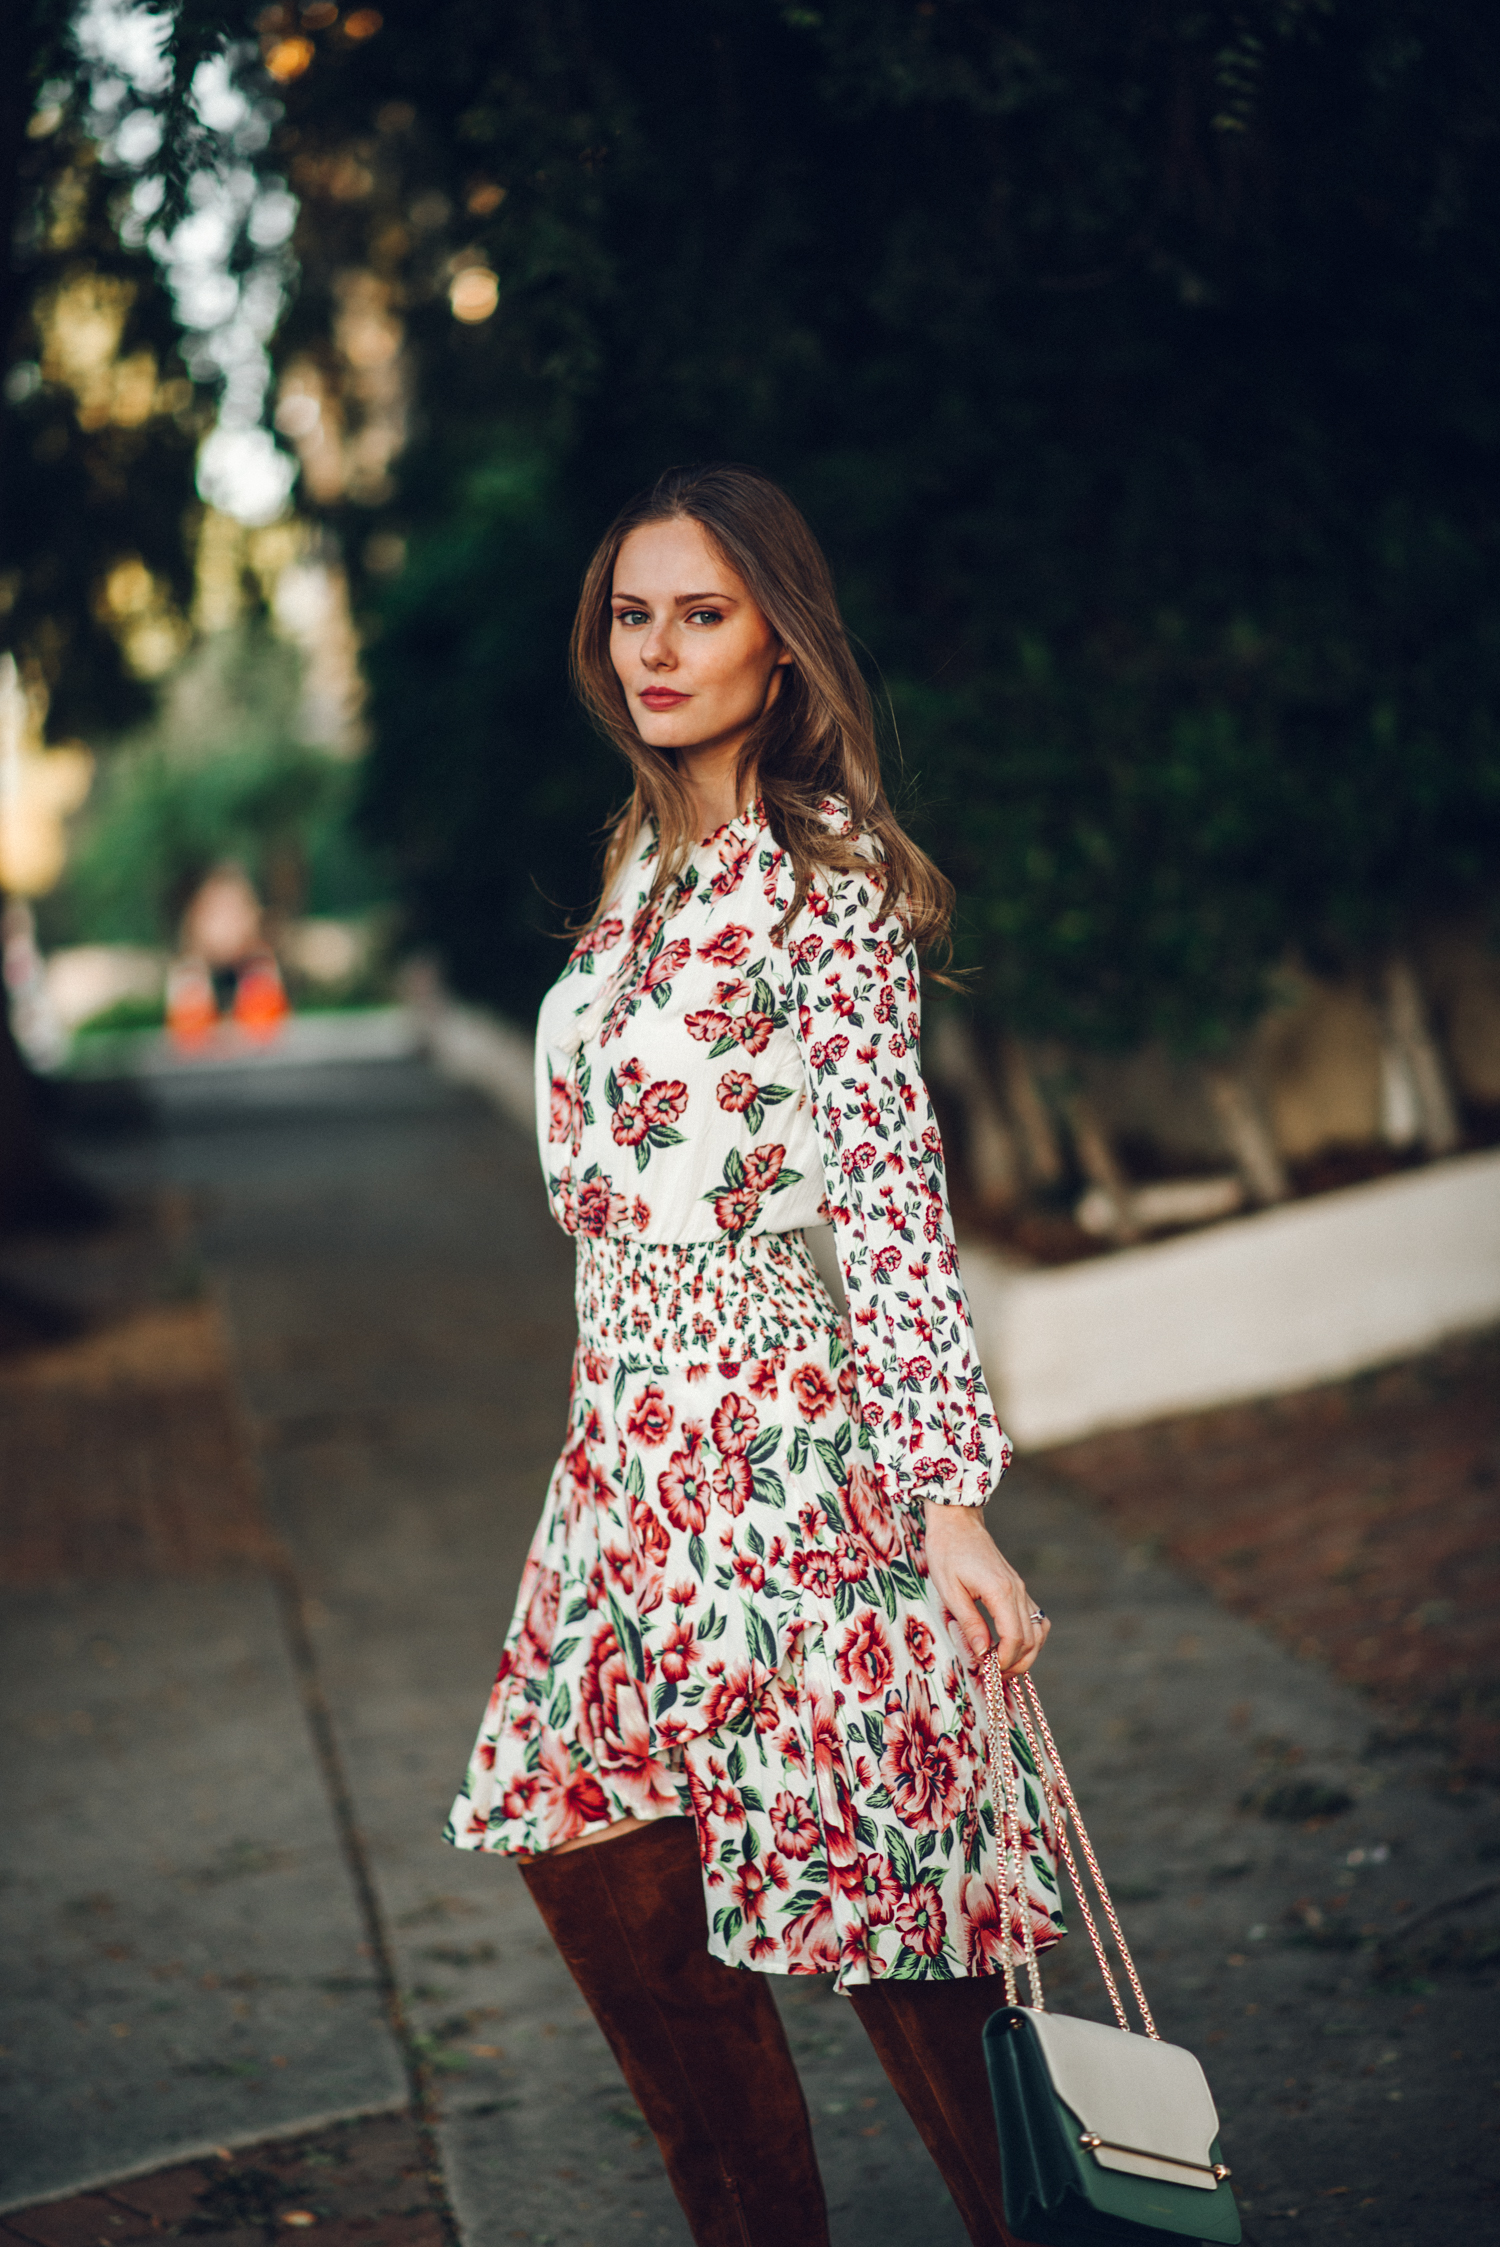 The Fall Floral Dress - The A List